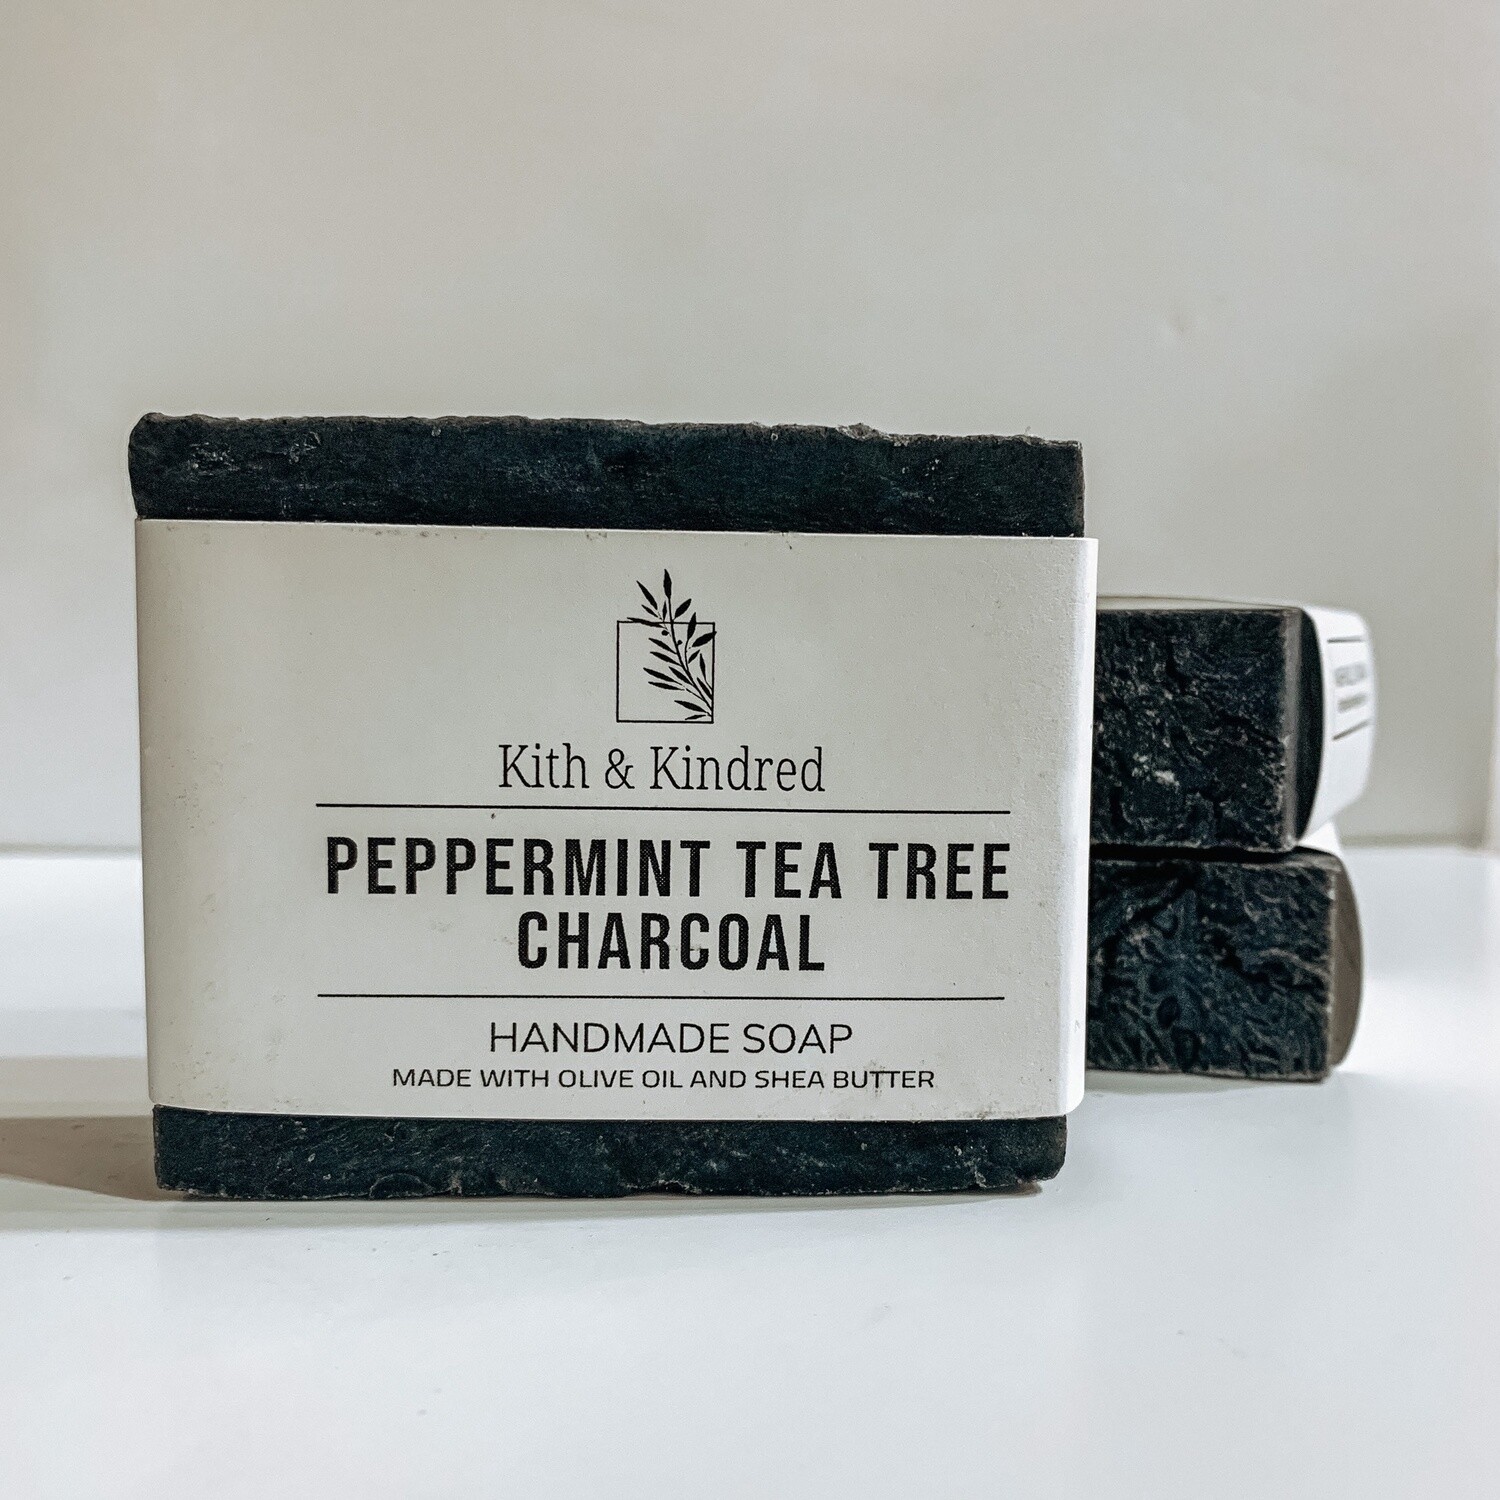 Pepermint Tea Tree with Charcoal Soap - 1 bar